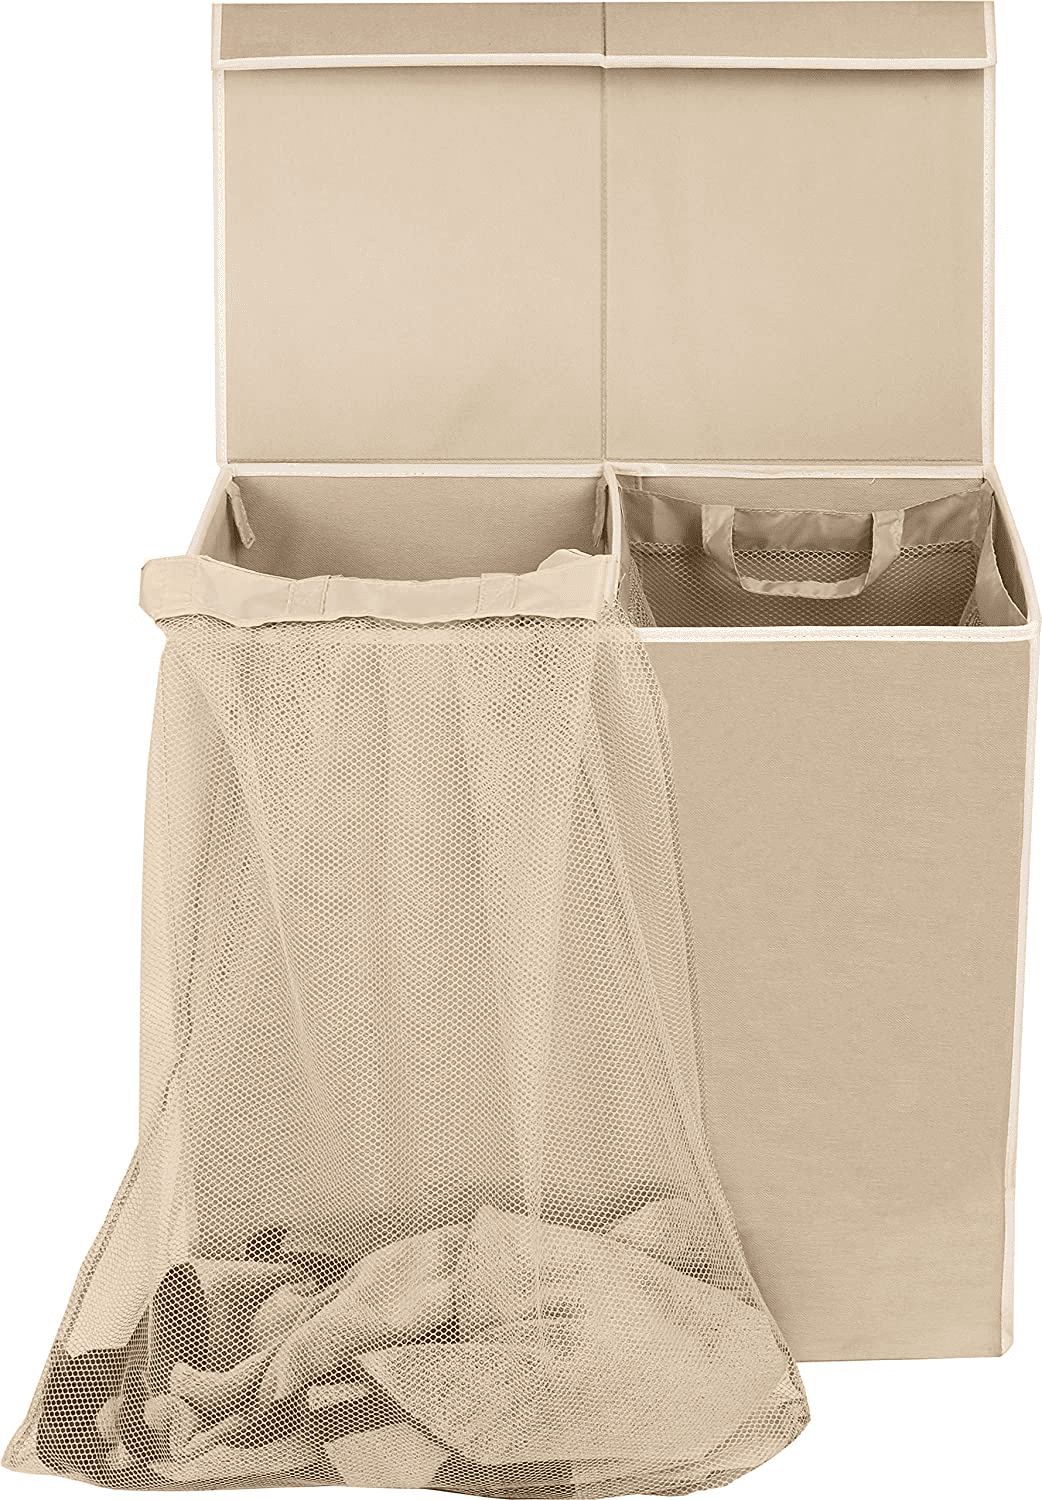 Beige Simple Houseware Double Laundry Hamper with Lid and Removable Laundry Bags